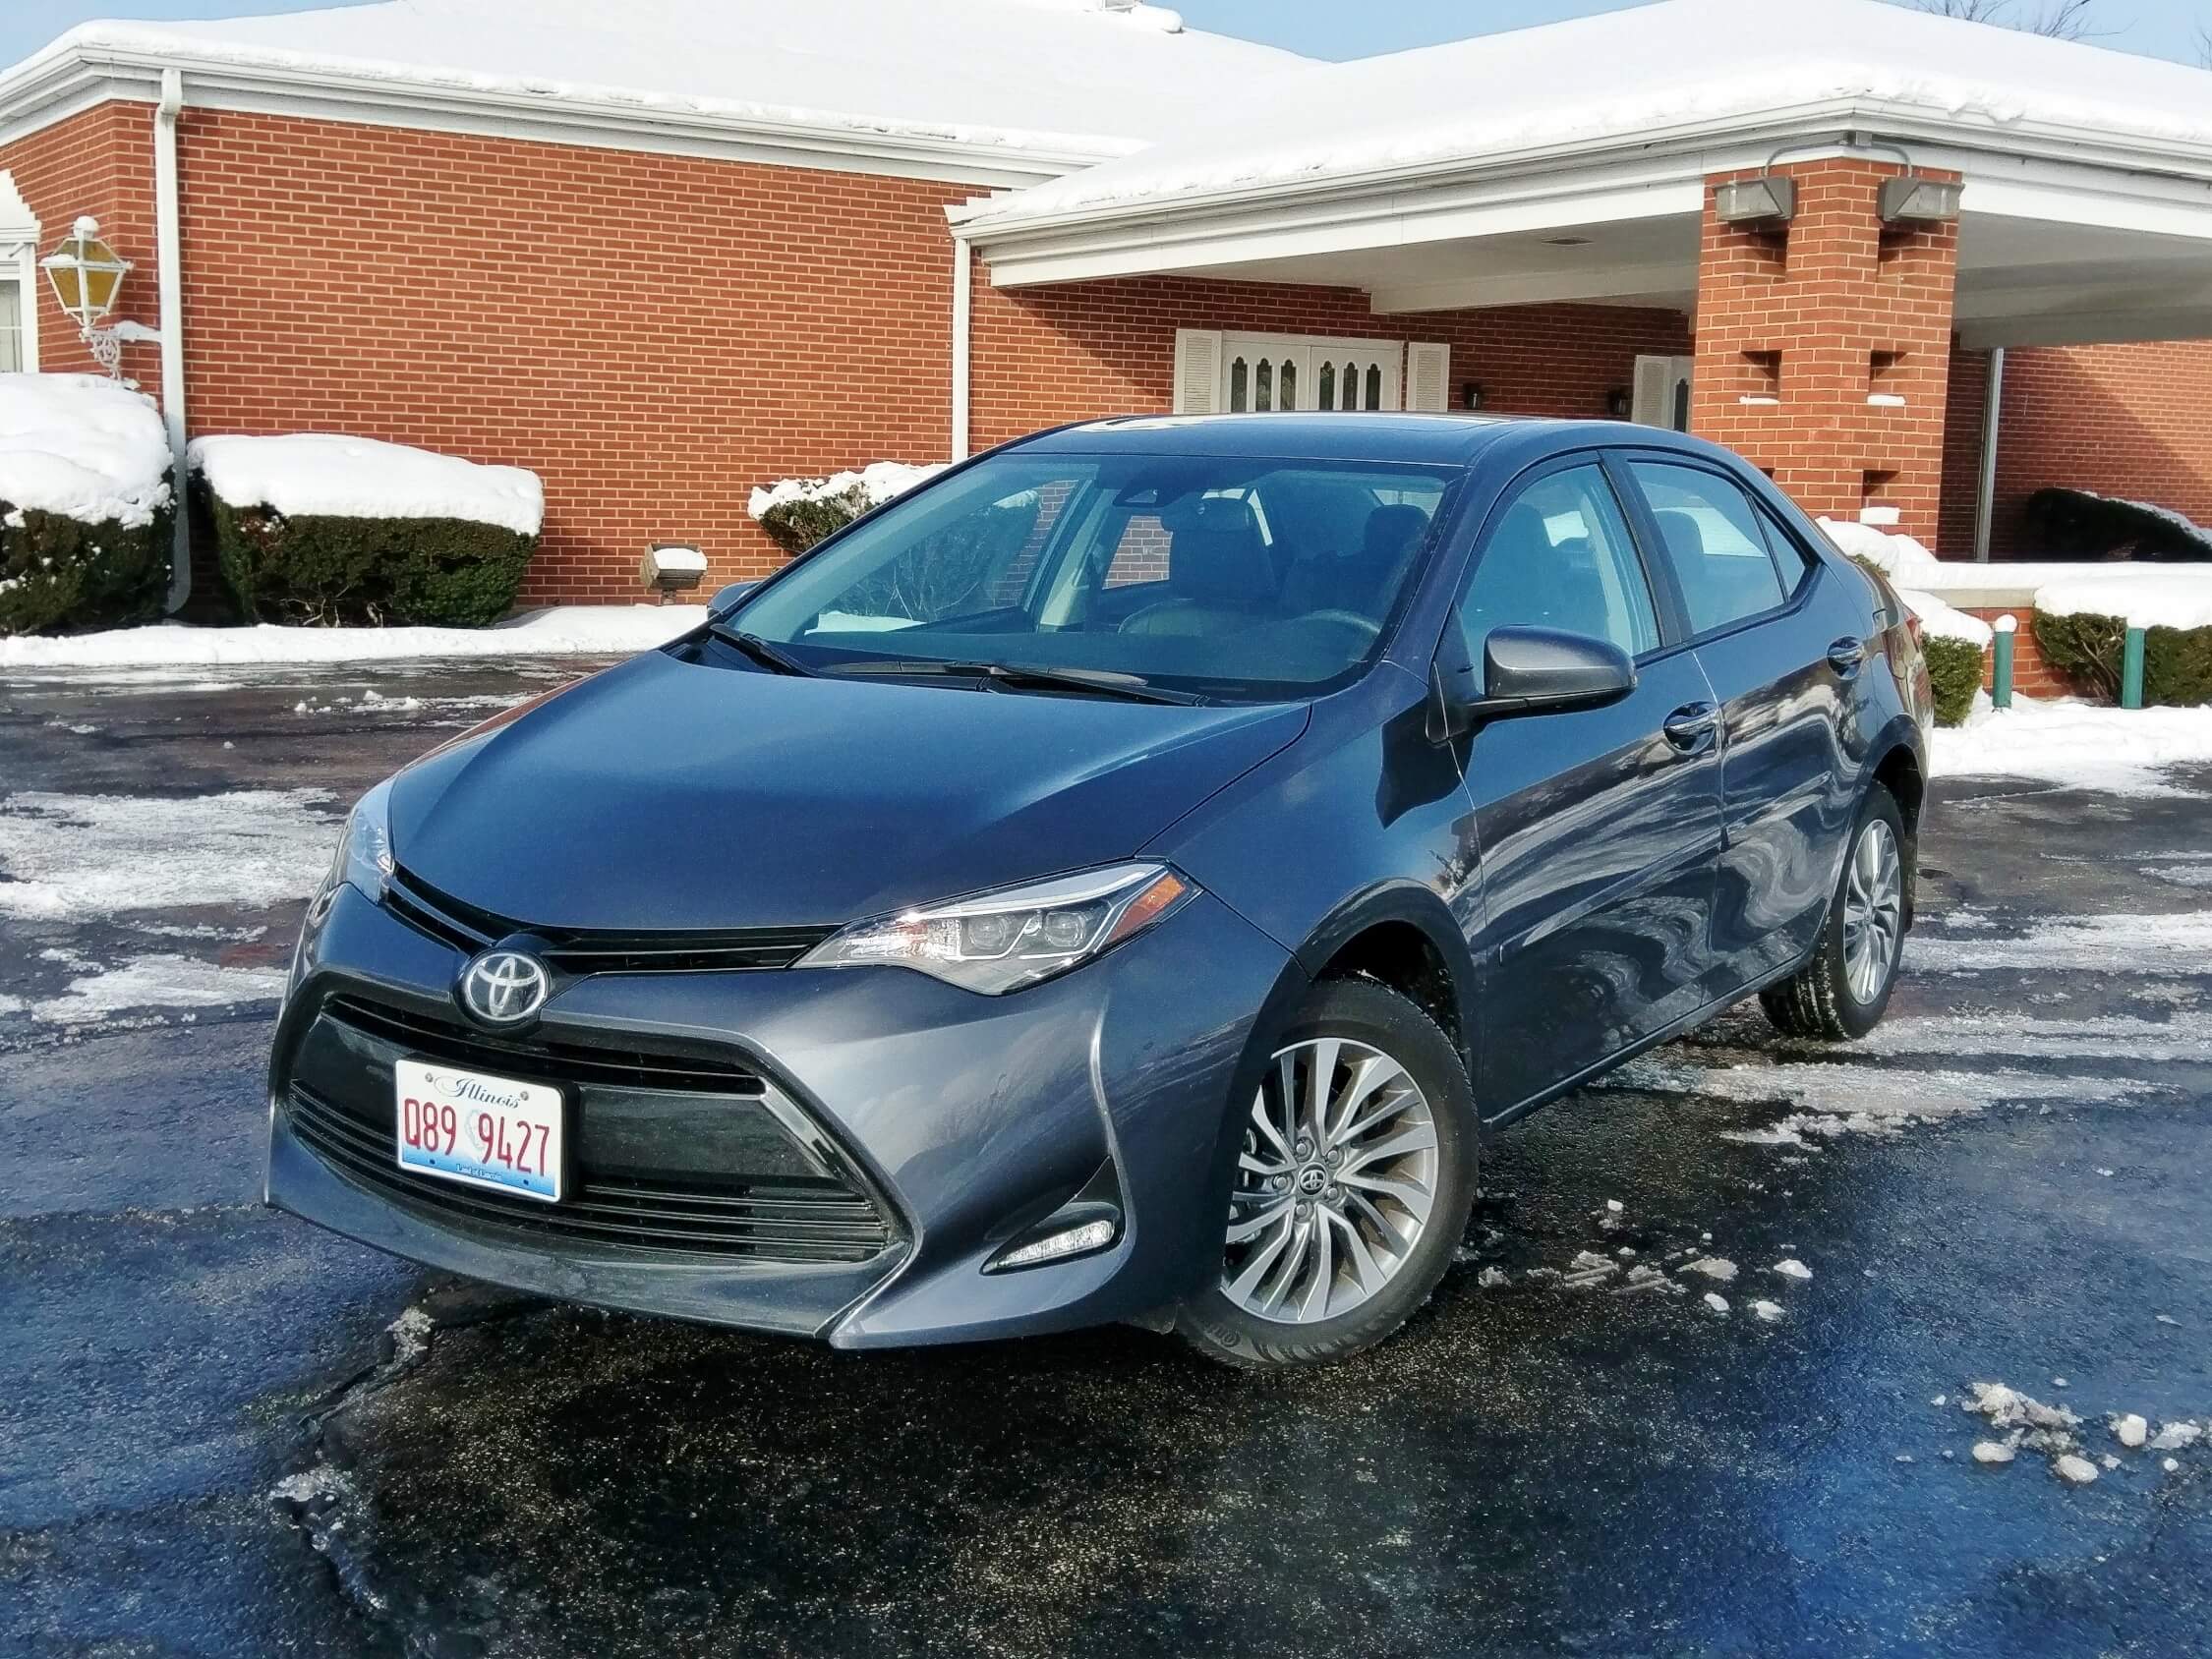 2018 Toyota Corolla XLE: The Maytag of compact family sedans adopts a softer, curving front fascia and deeper airdam. Starting MSRP = $19k.